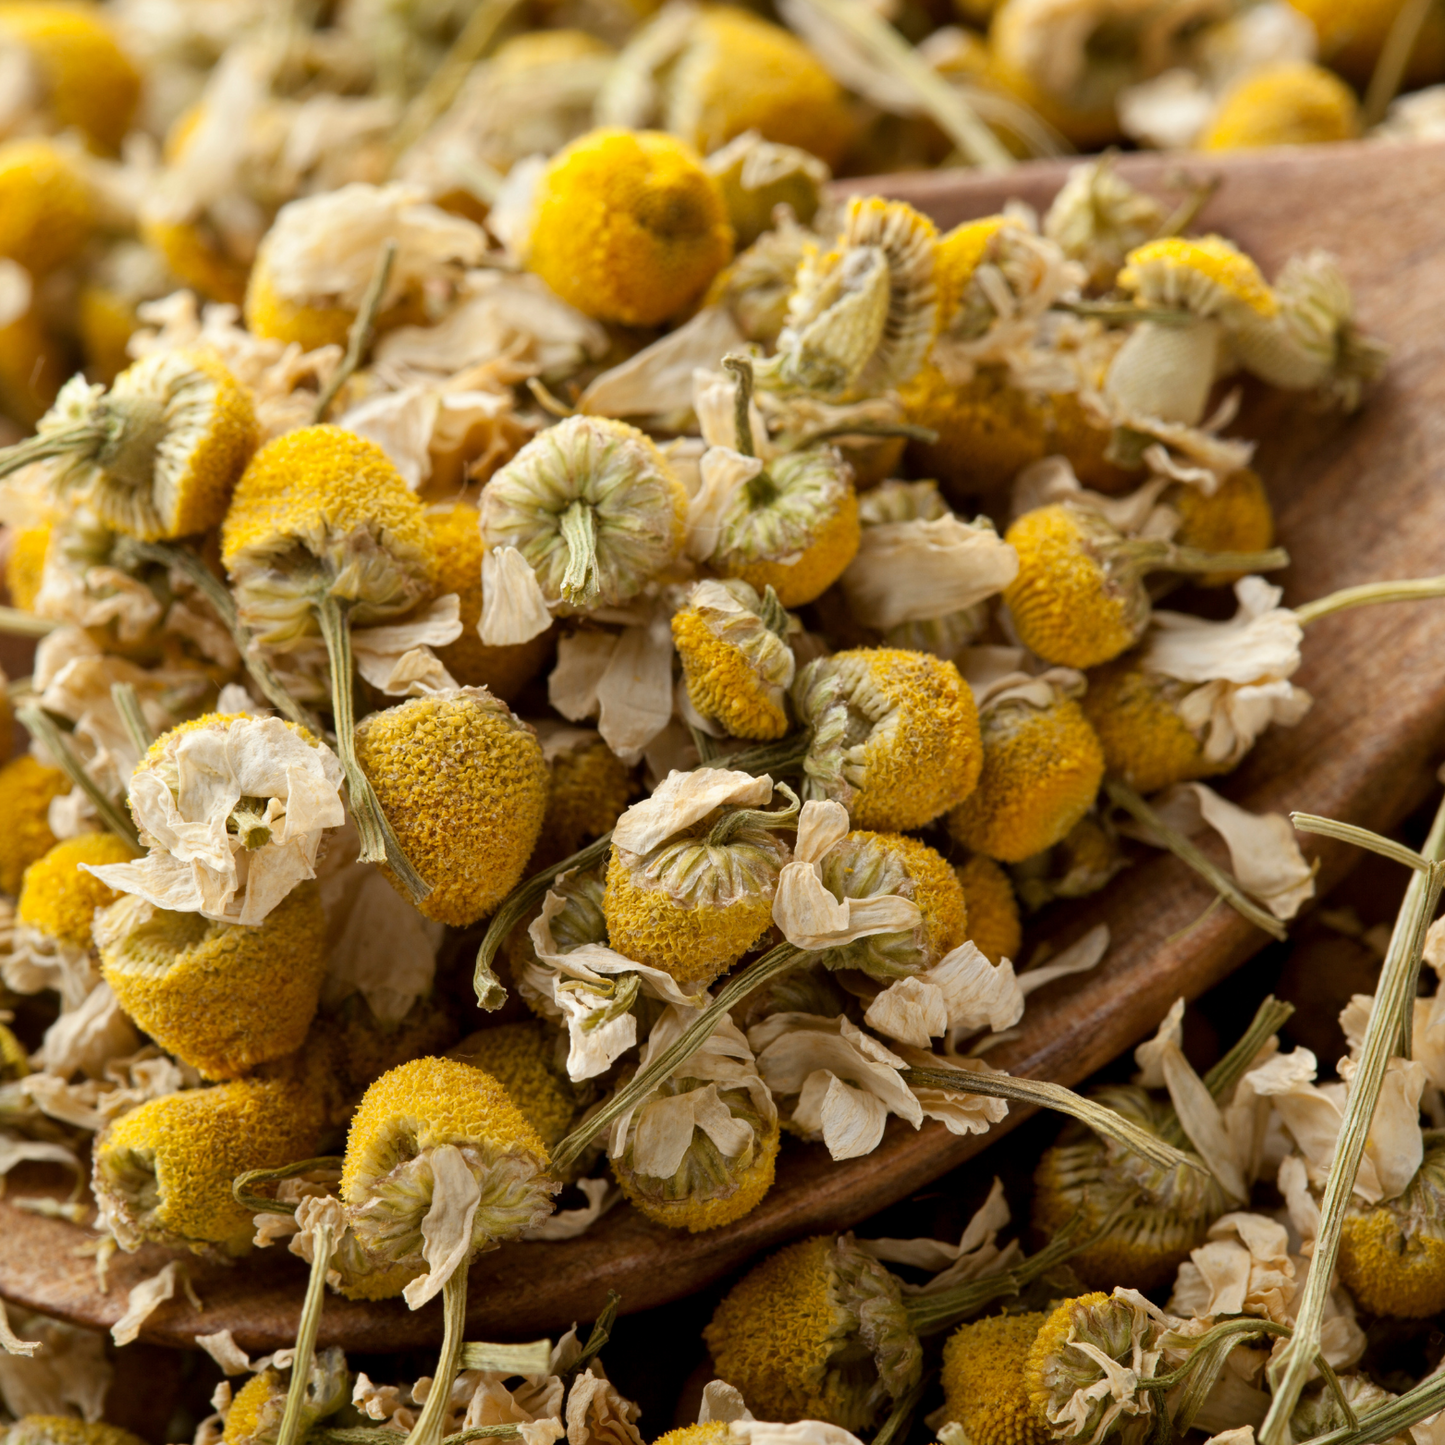 Witchy Pooh's Chamomile Flowers Loose Leaf Herbal Tea, Caffeine Free, For Stress Relief and Sleep Aid